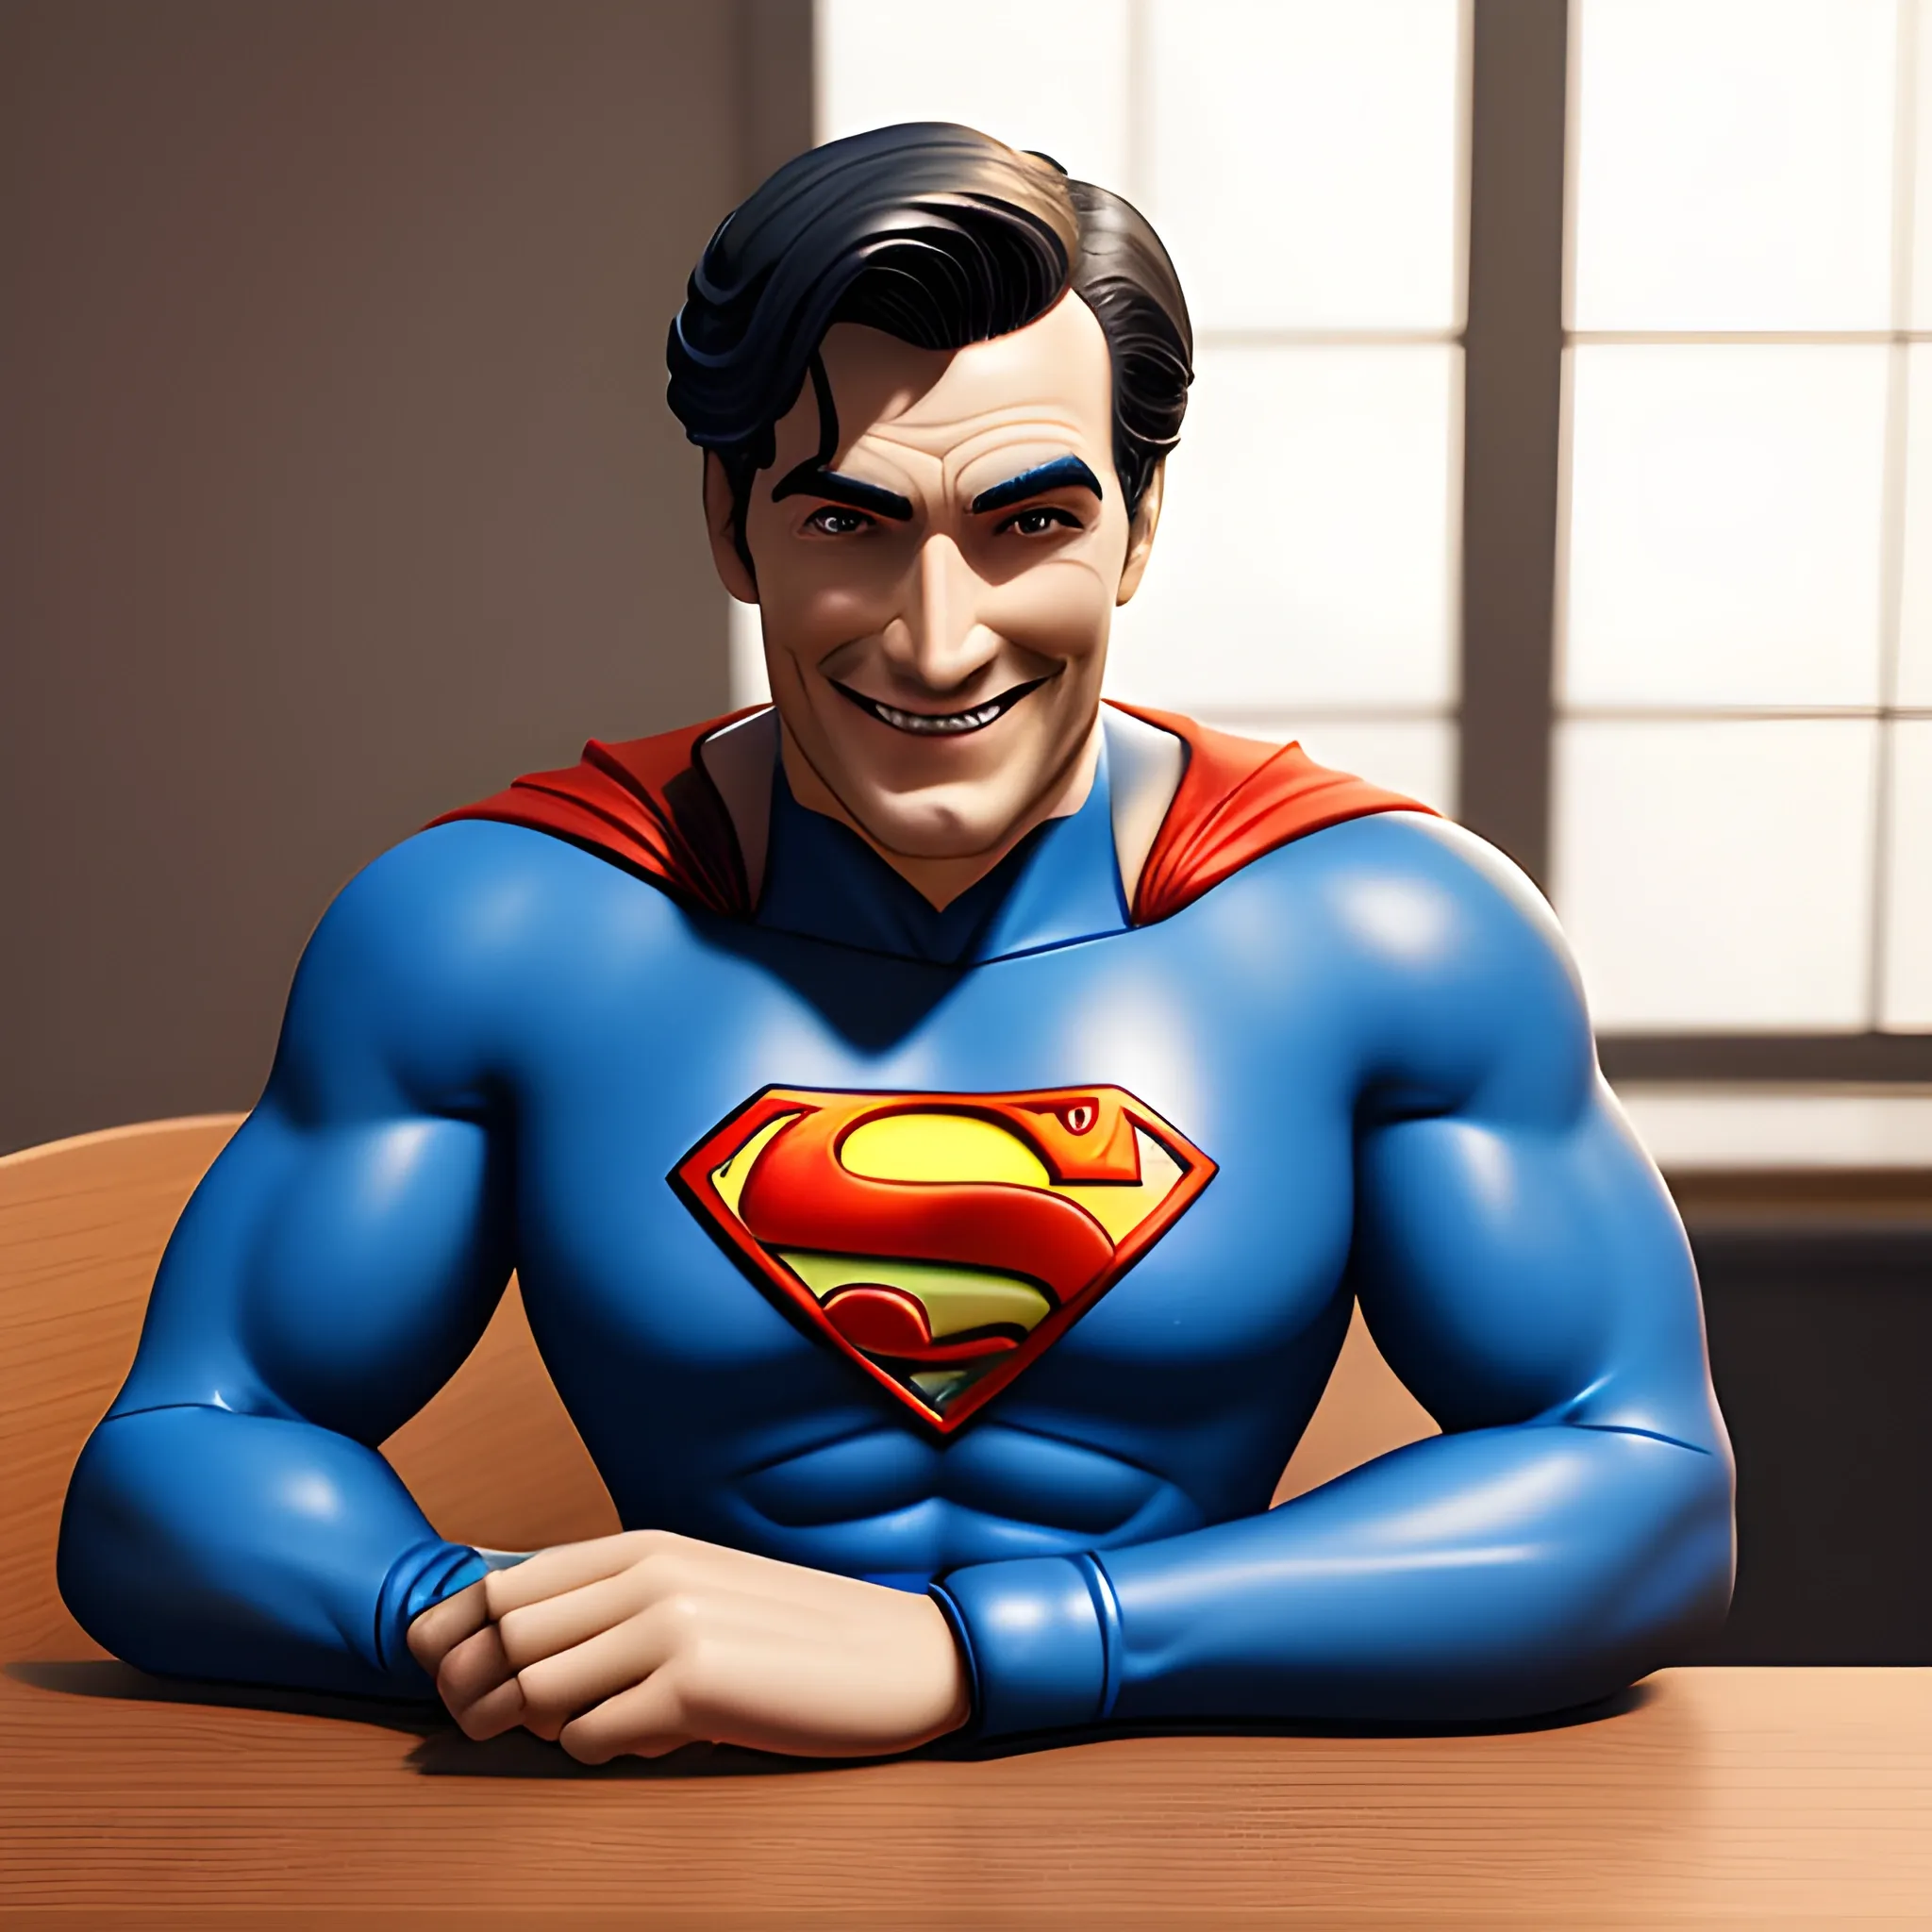 A gentleman sits at a table, he smiles, looks at a computer screen on the table, a gentleman in a Superman suit, attractive details, realistic ultra-detailed